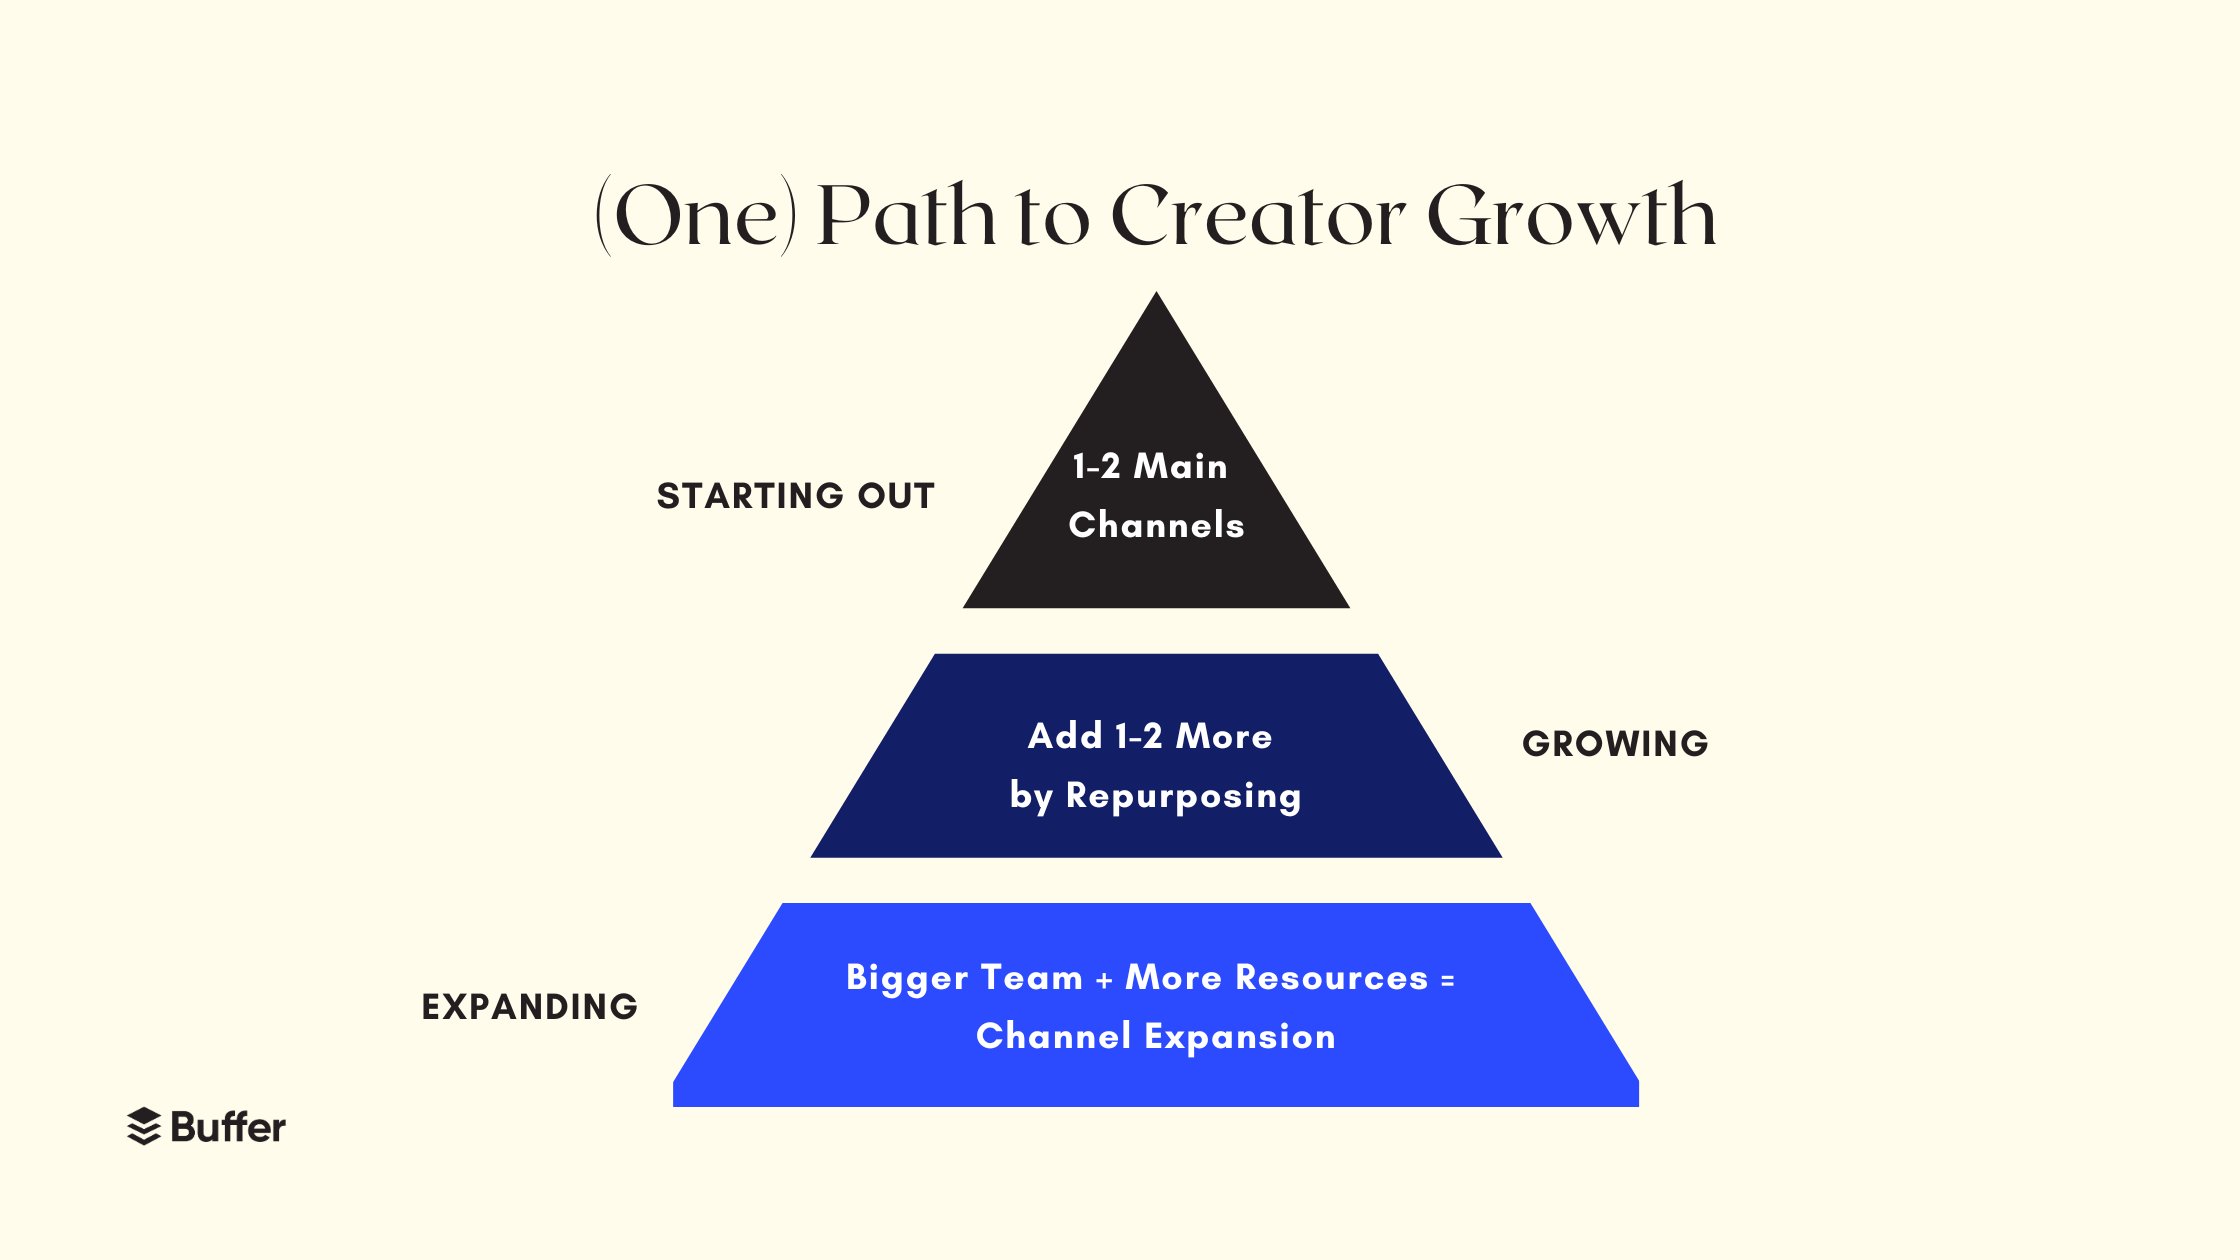 Pyramid showing the paths to creator growth